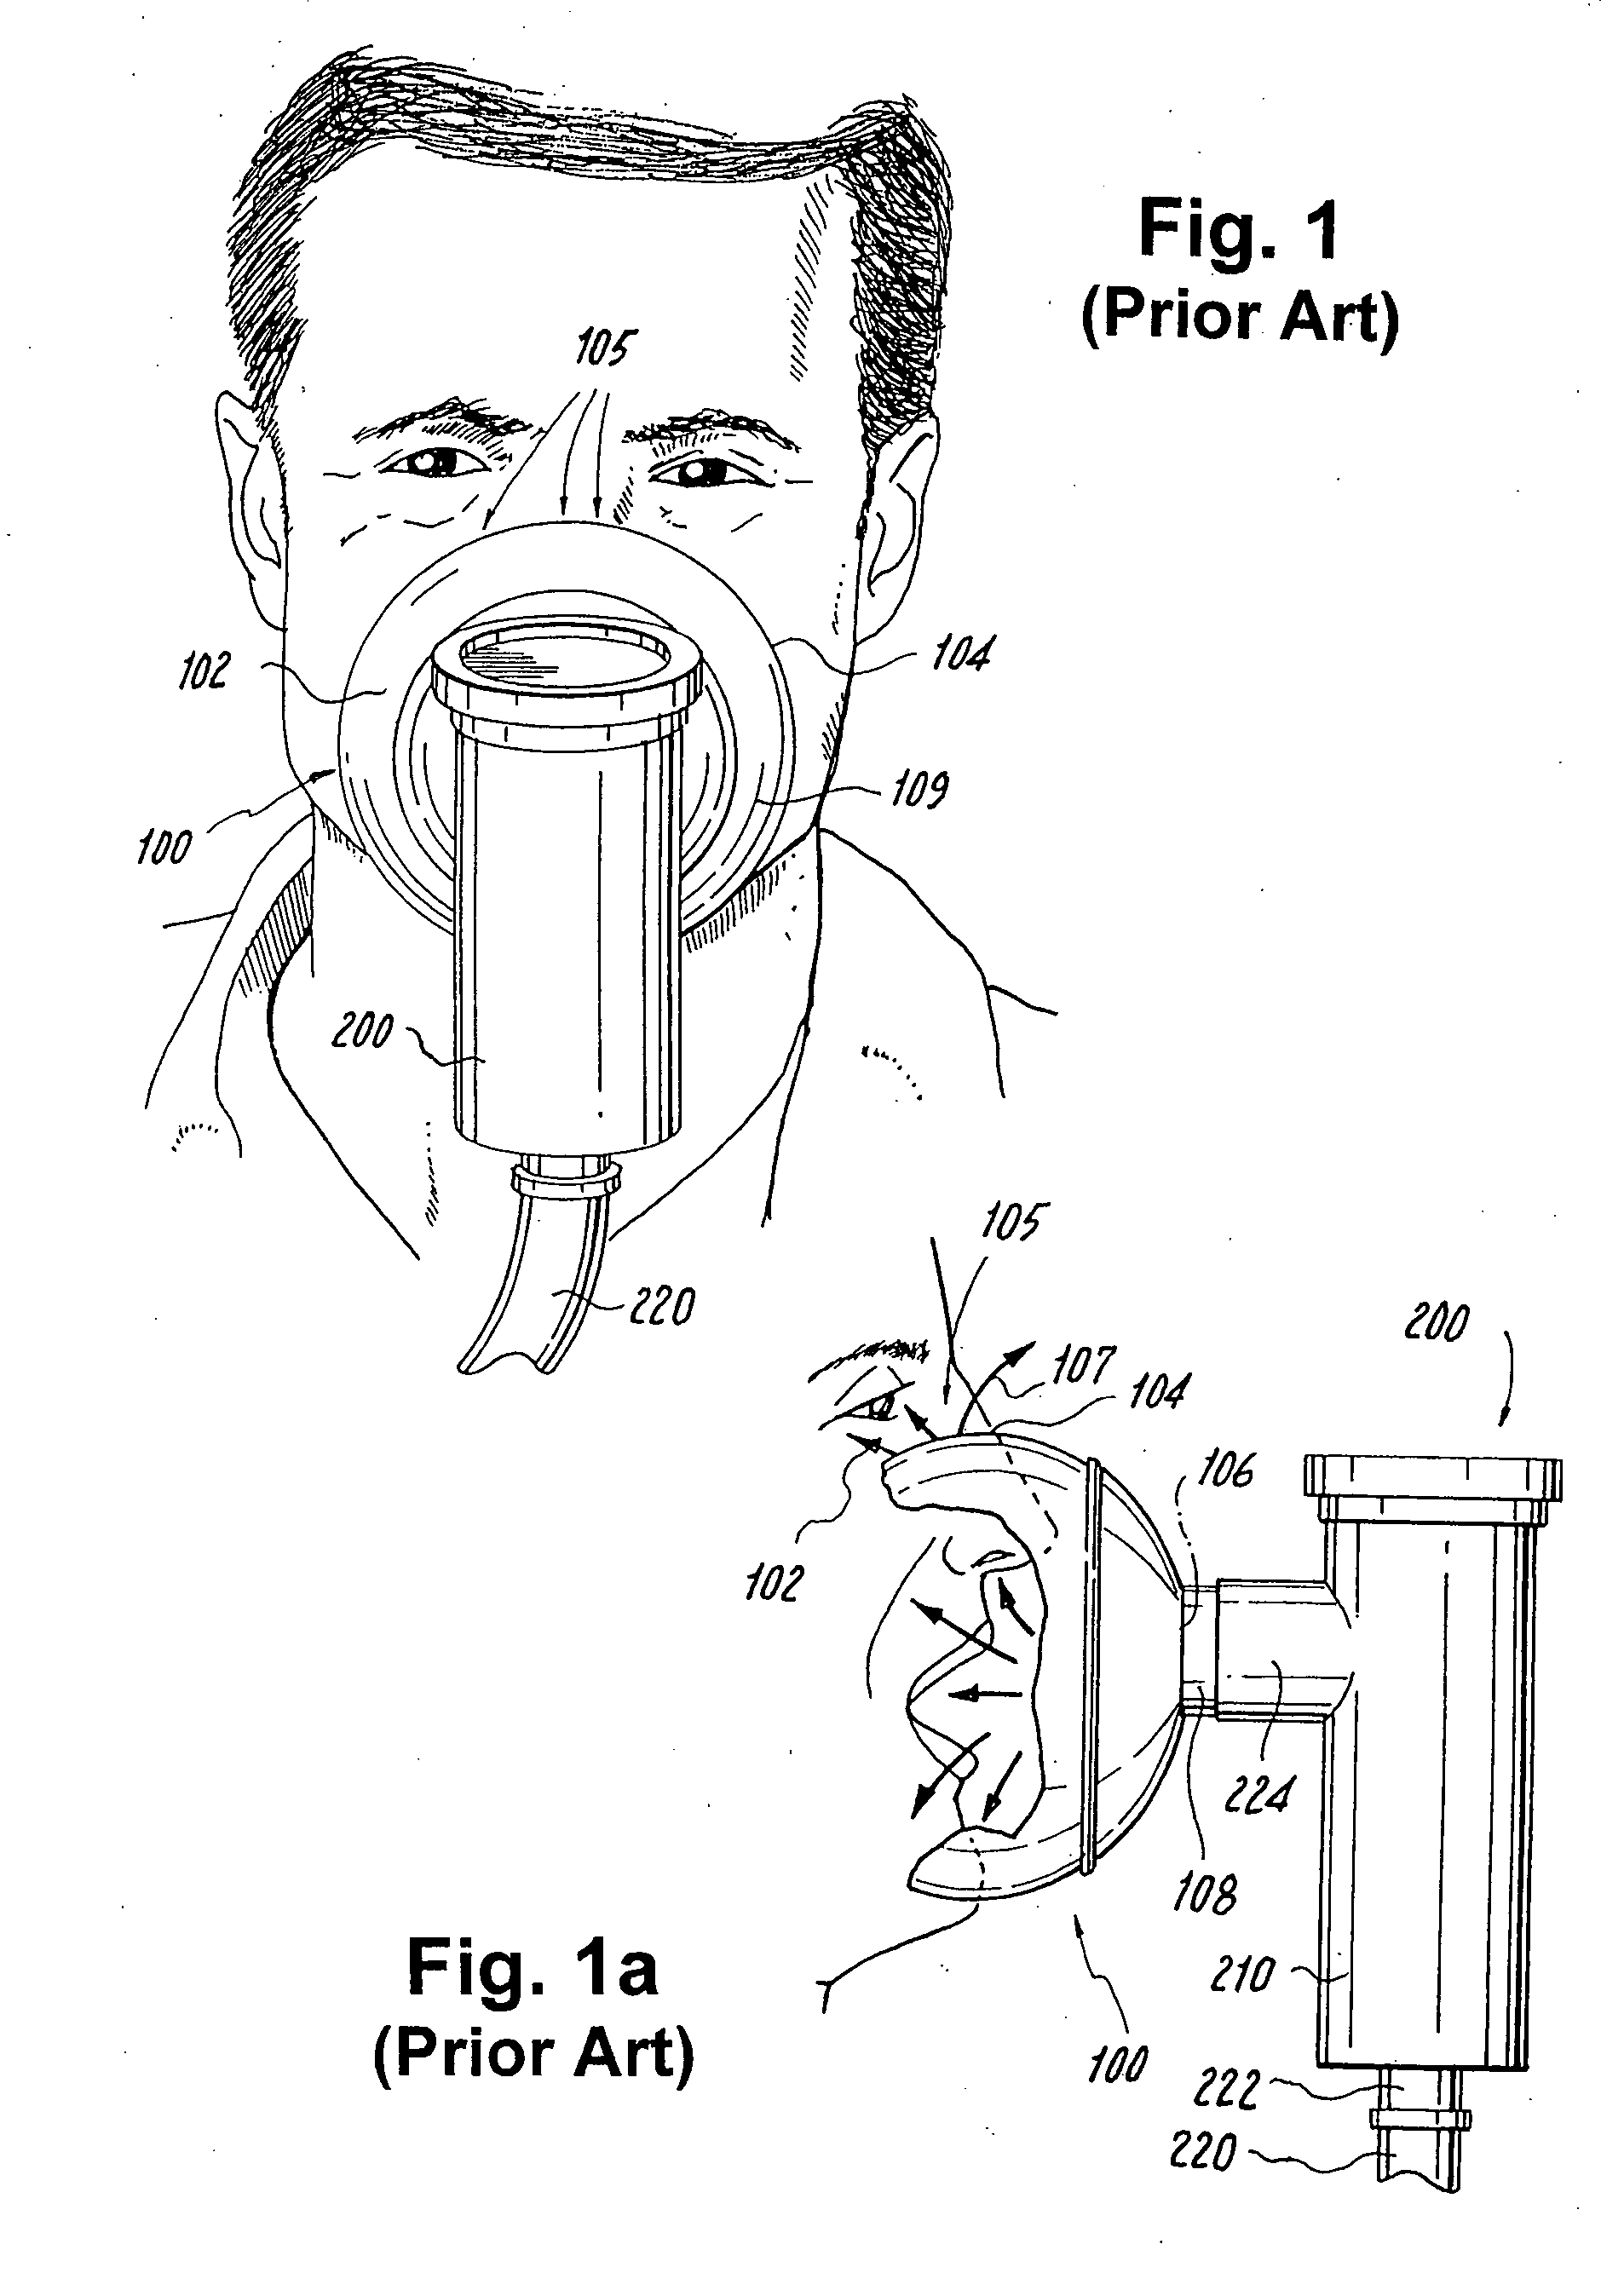 Face mask for use in pressurized drug delivery systems